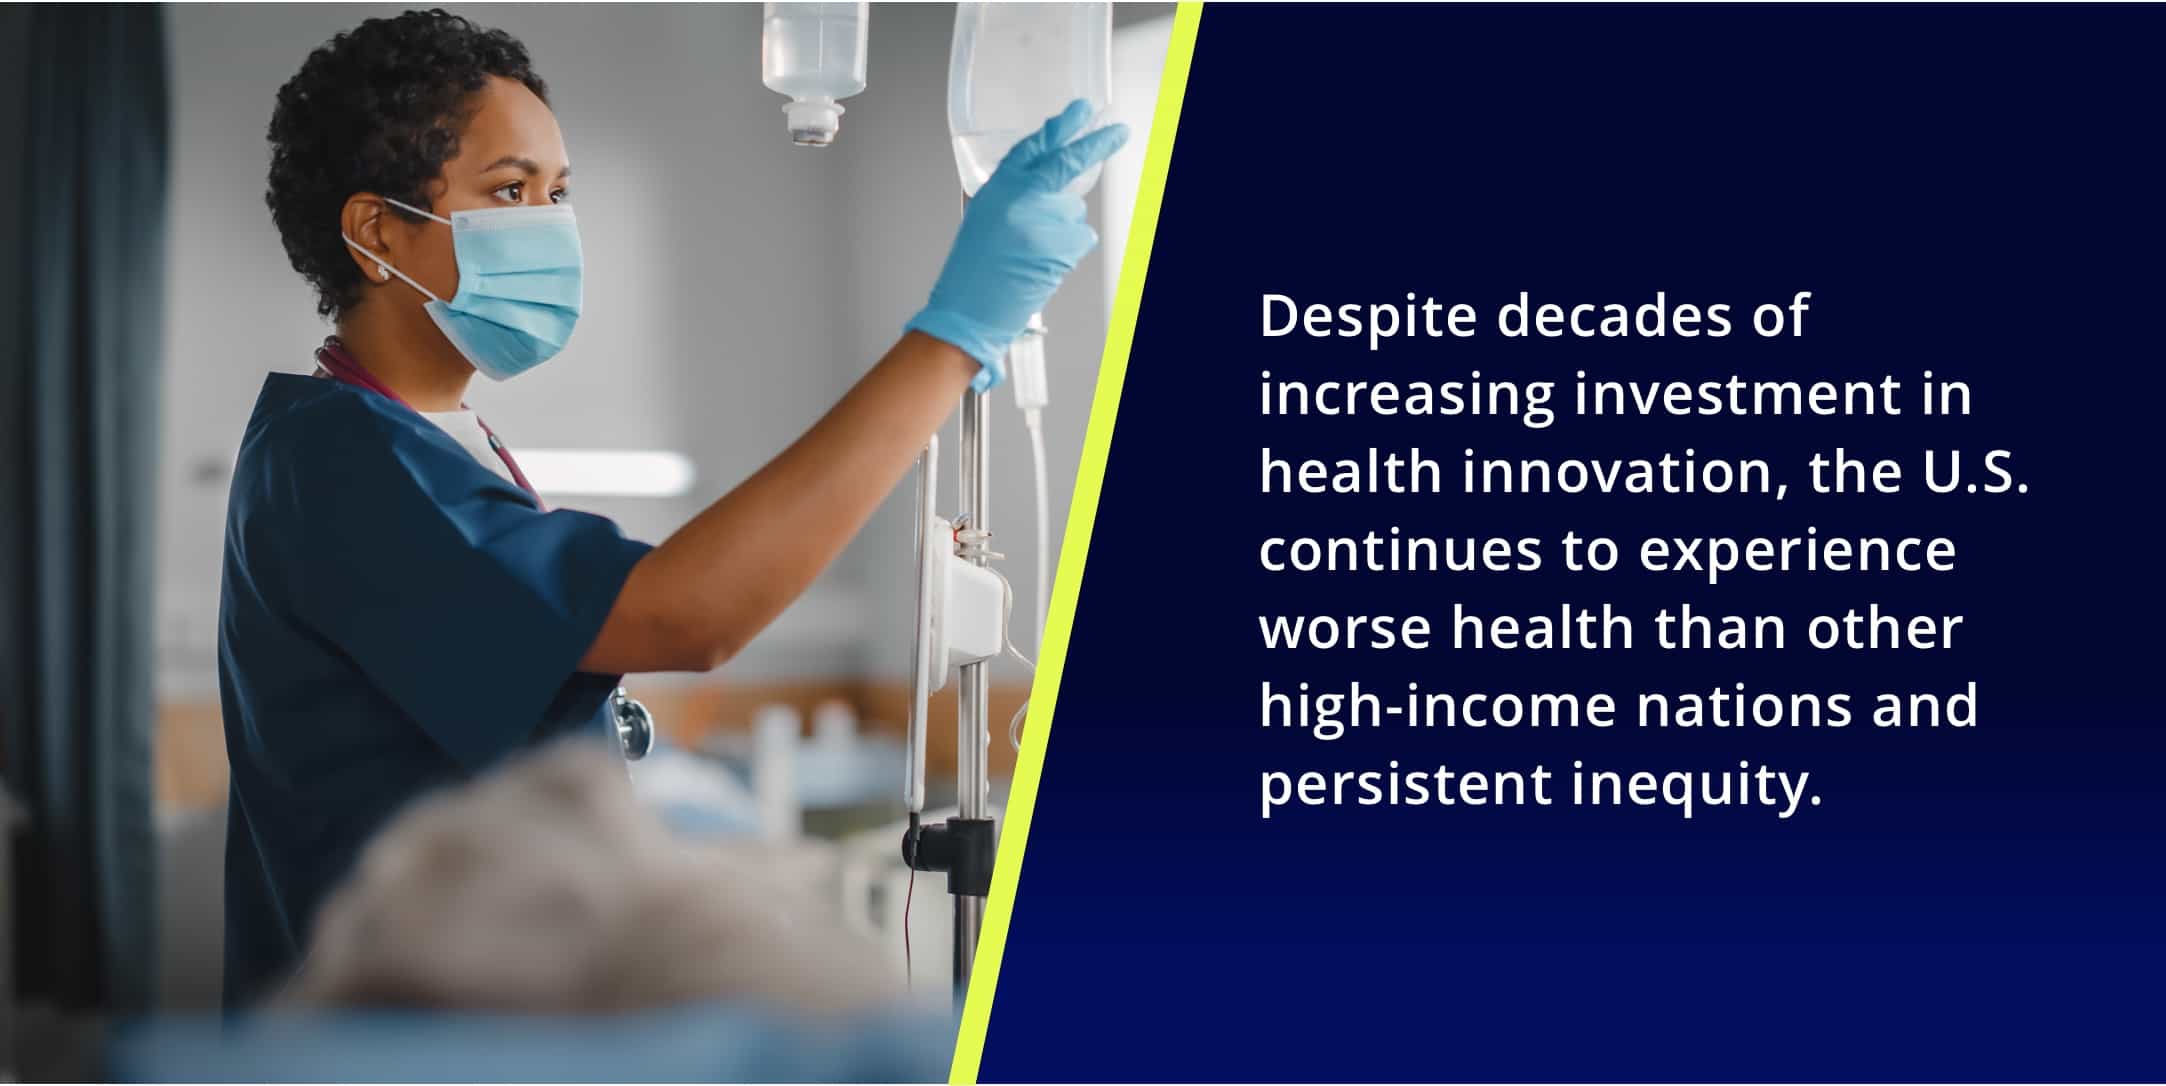 Despite decades of increasing investment in health innovation, the U.S. continues to experience worse health than other high-income nations and persistent inequity.